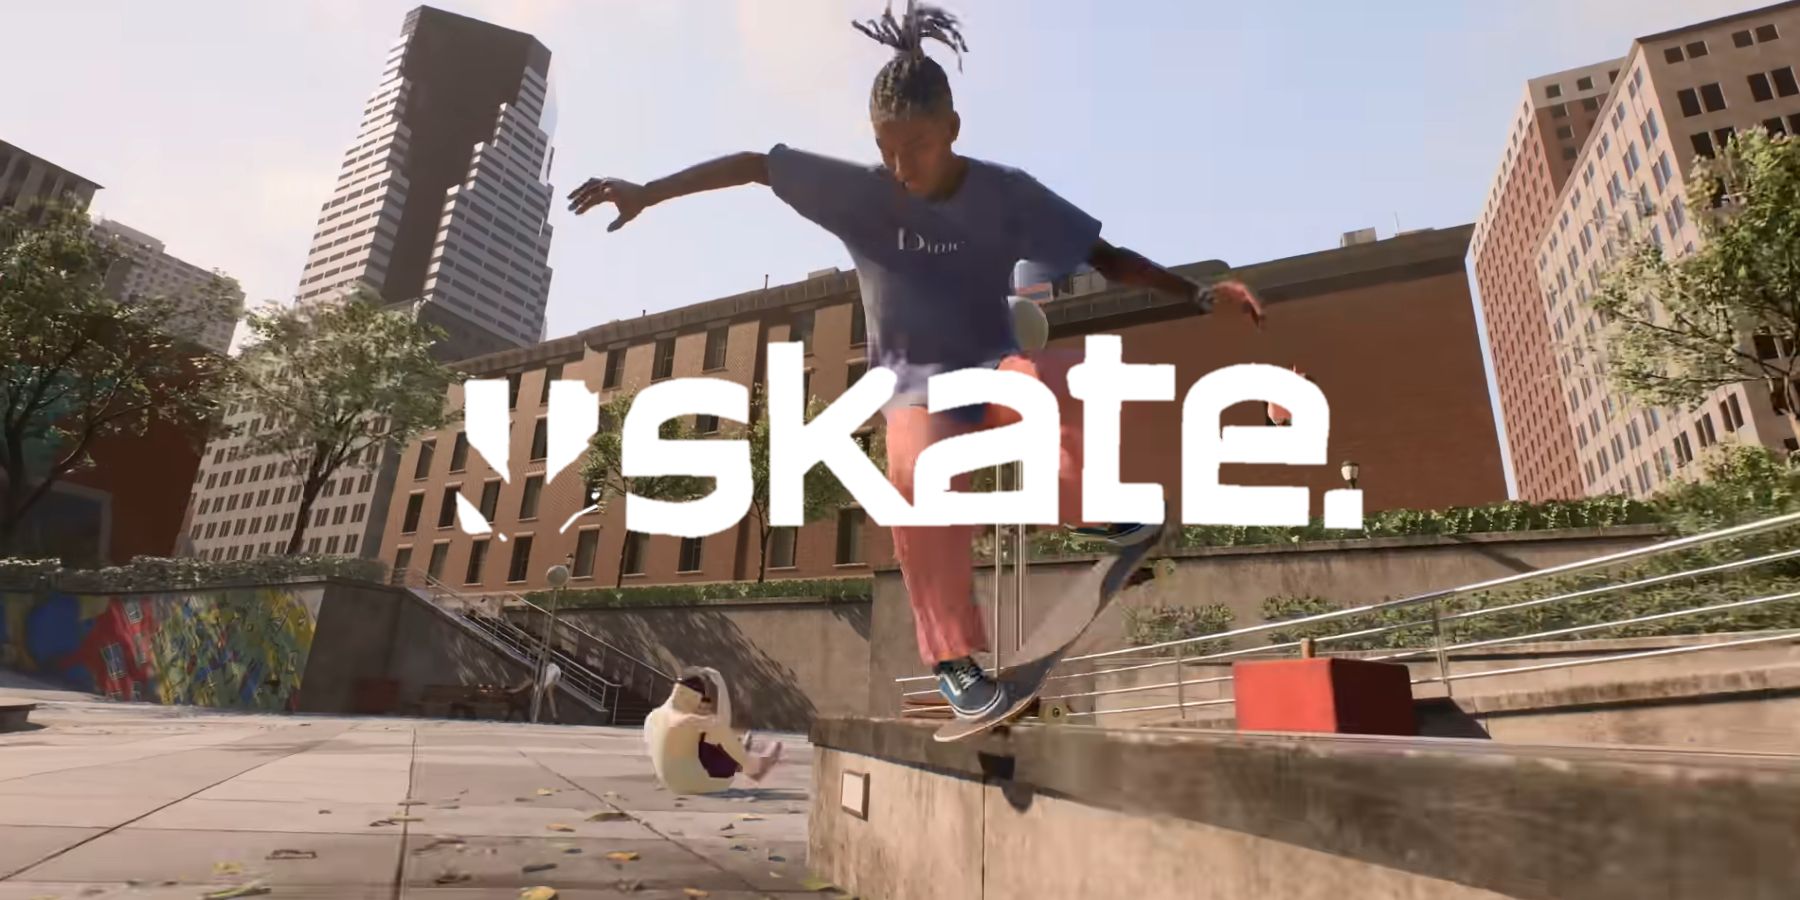 Skate 4 is free-to-play